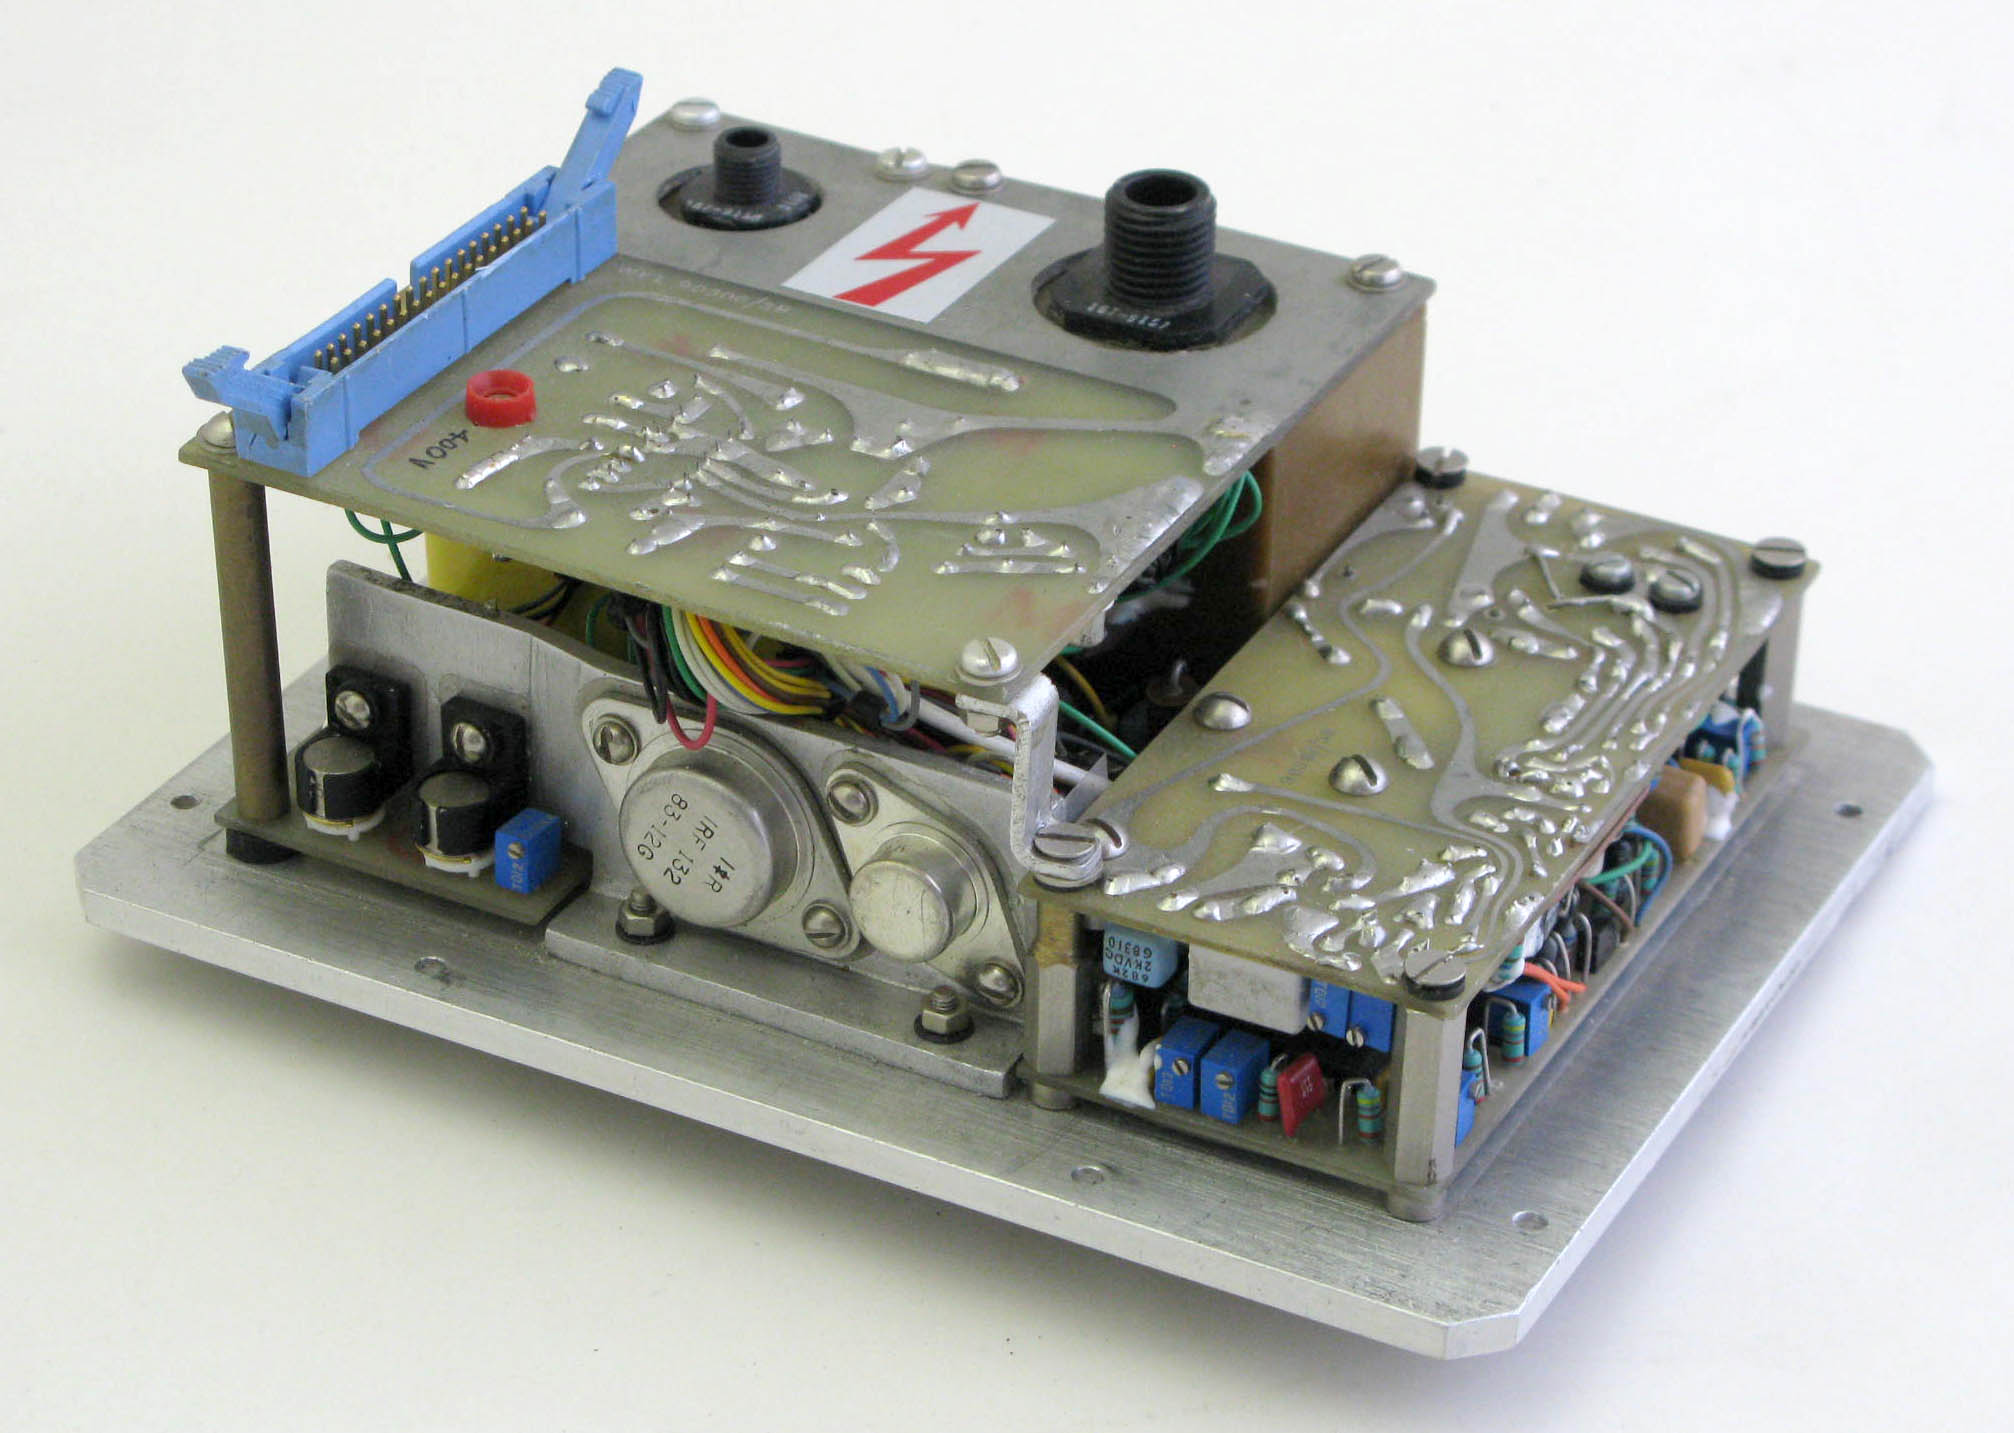 HUD High Voltage Power Supply Unit Prototype